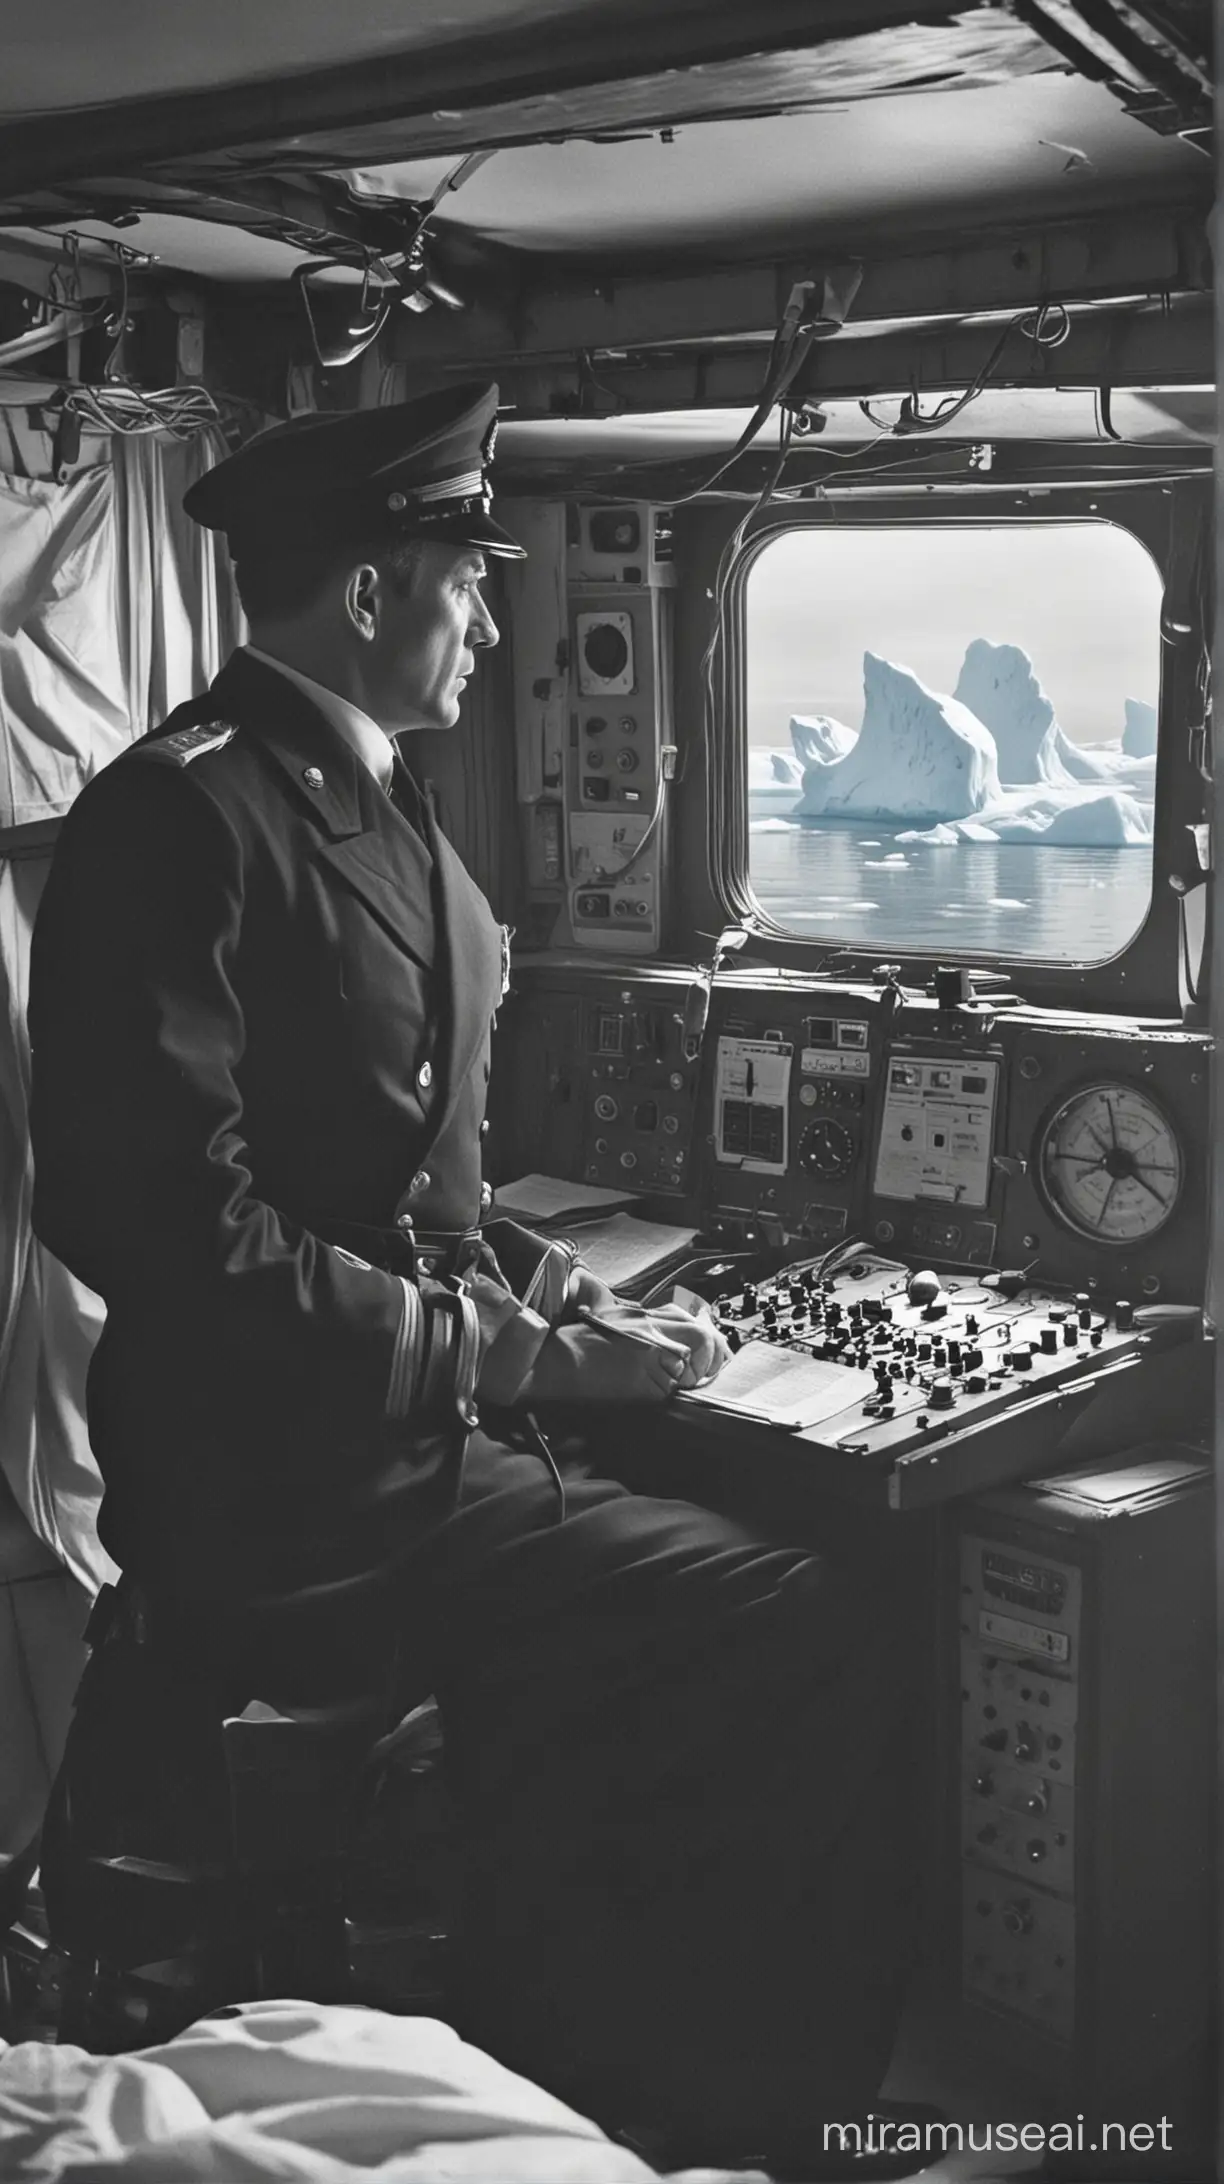 Captain Lord orders the radio operator who was sleeping in his room in shipe to alert other ships about the icebergs.